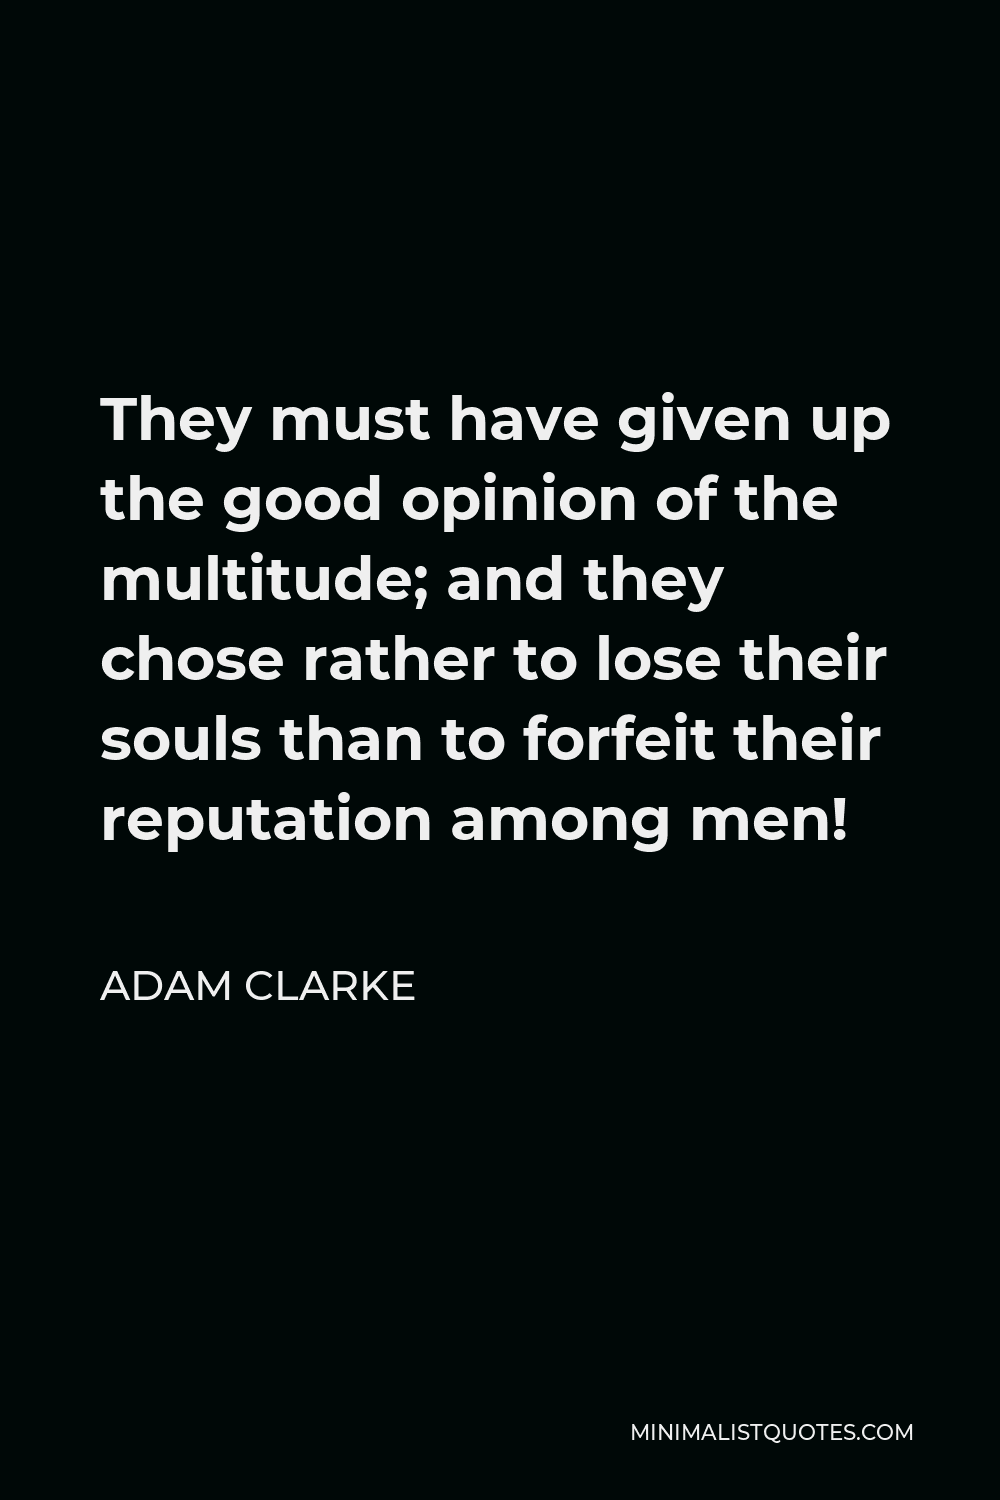 Adam Clarke Quote - They must have given up the good opinion of the multitude; and they chose rather to lose their souls than to forfeit their reputation among men!